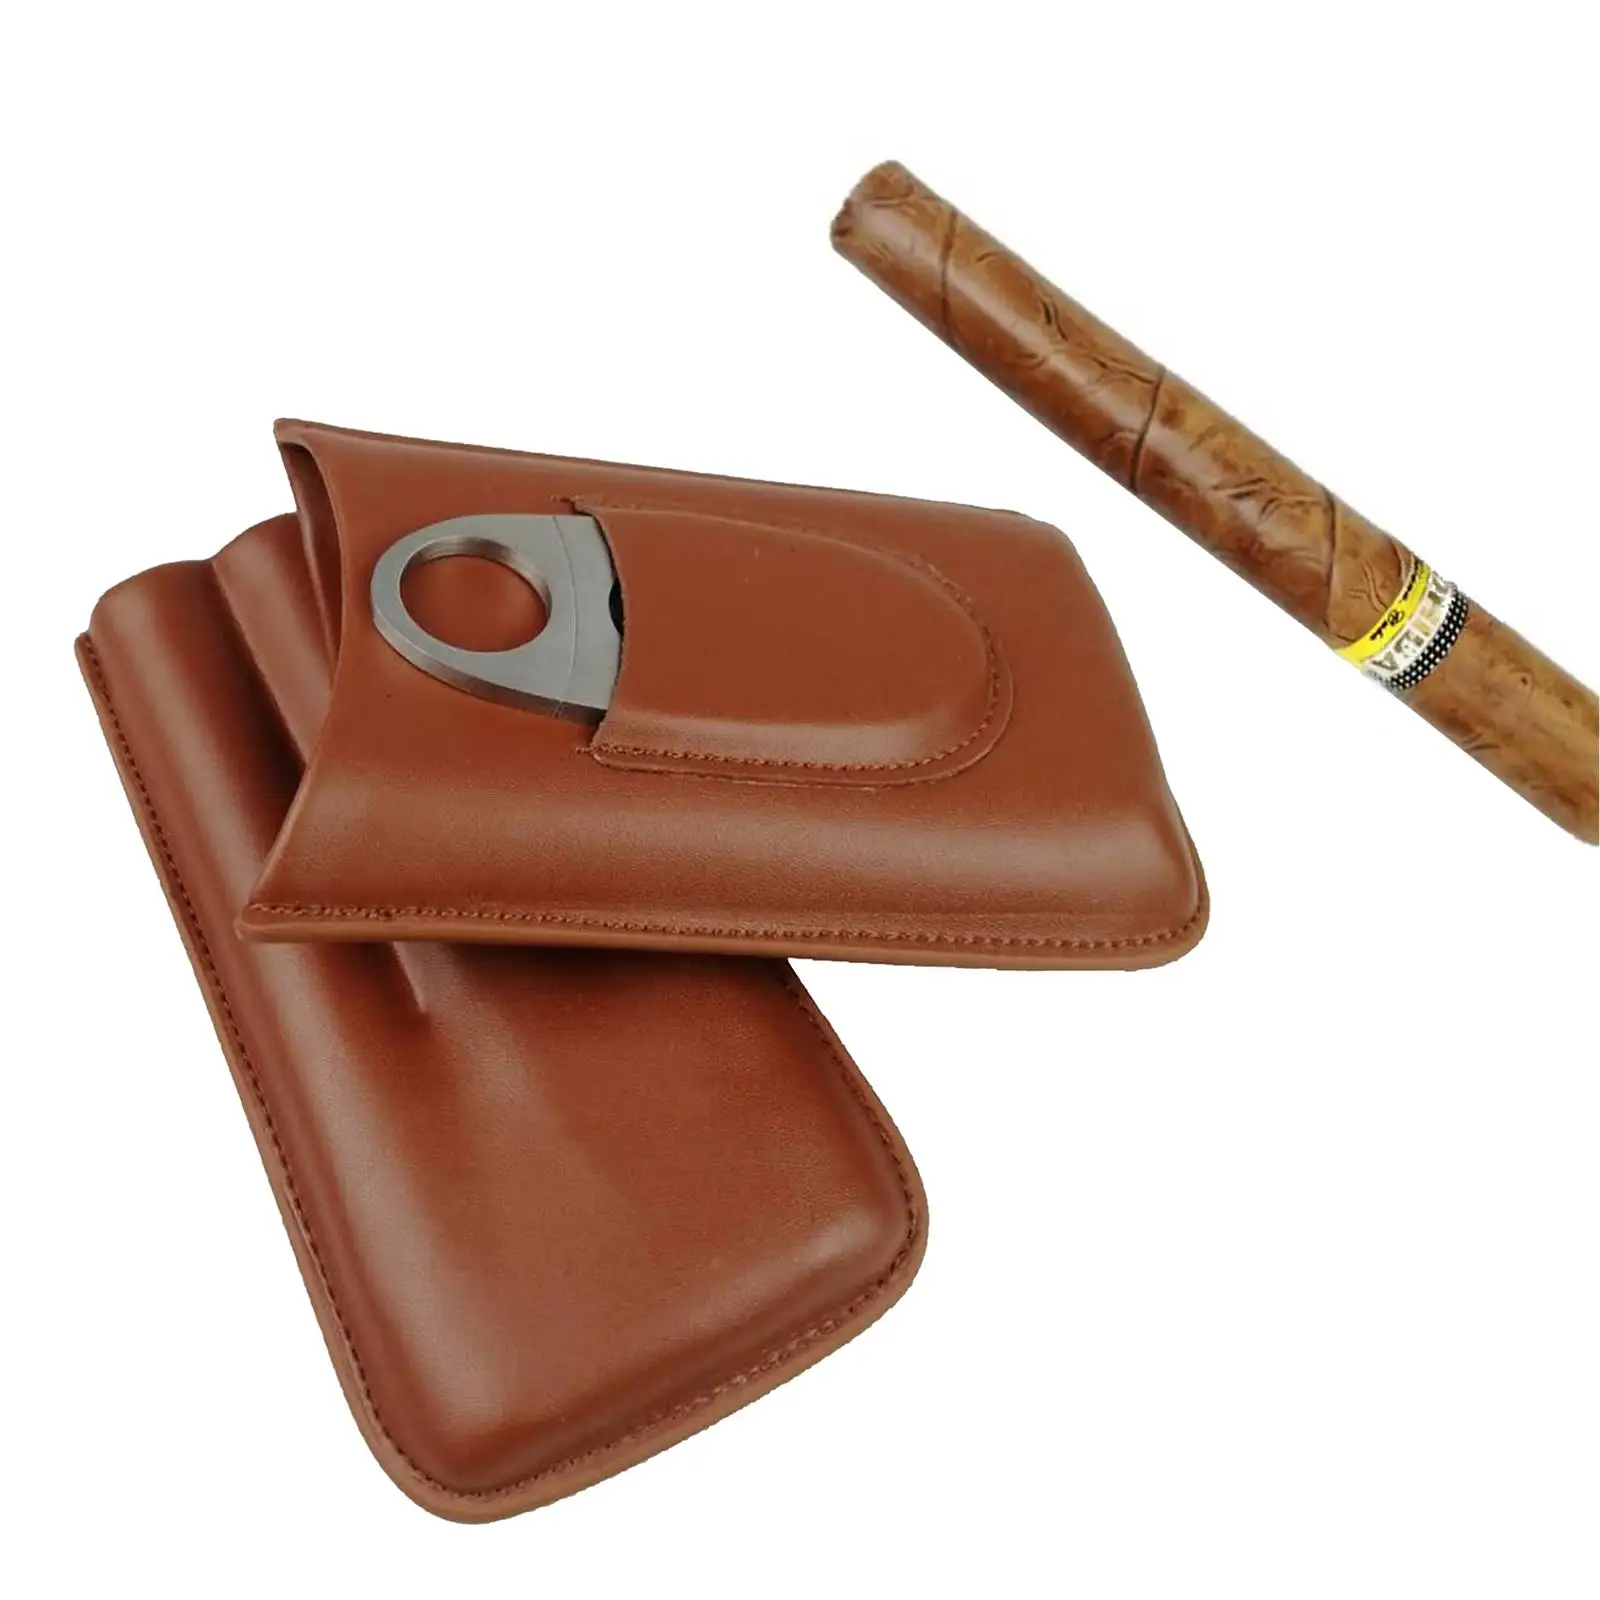 Leather Travel Cigar Case Portable 3 Tube Holder Humidor Cigars Accessories W/ Cigar Cutter Gift for Man